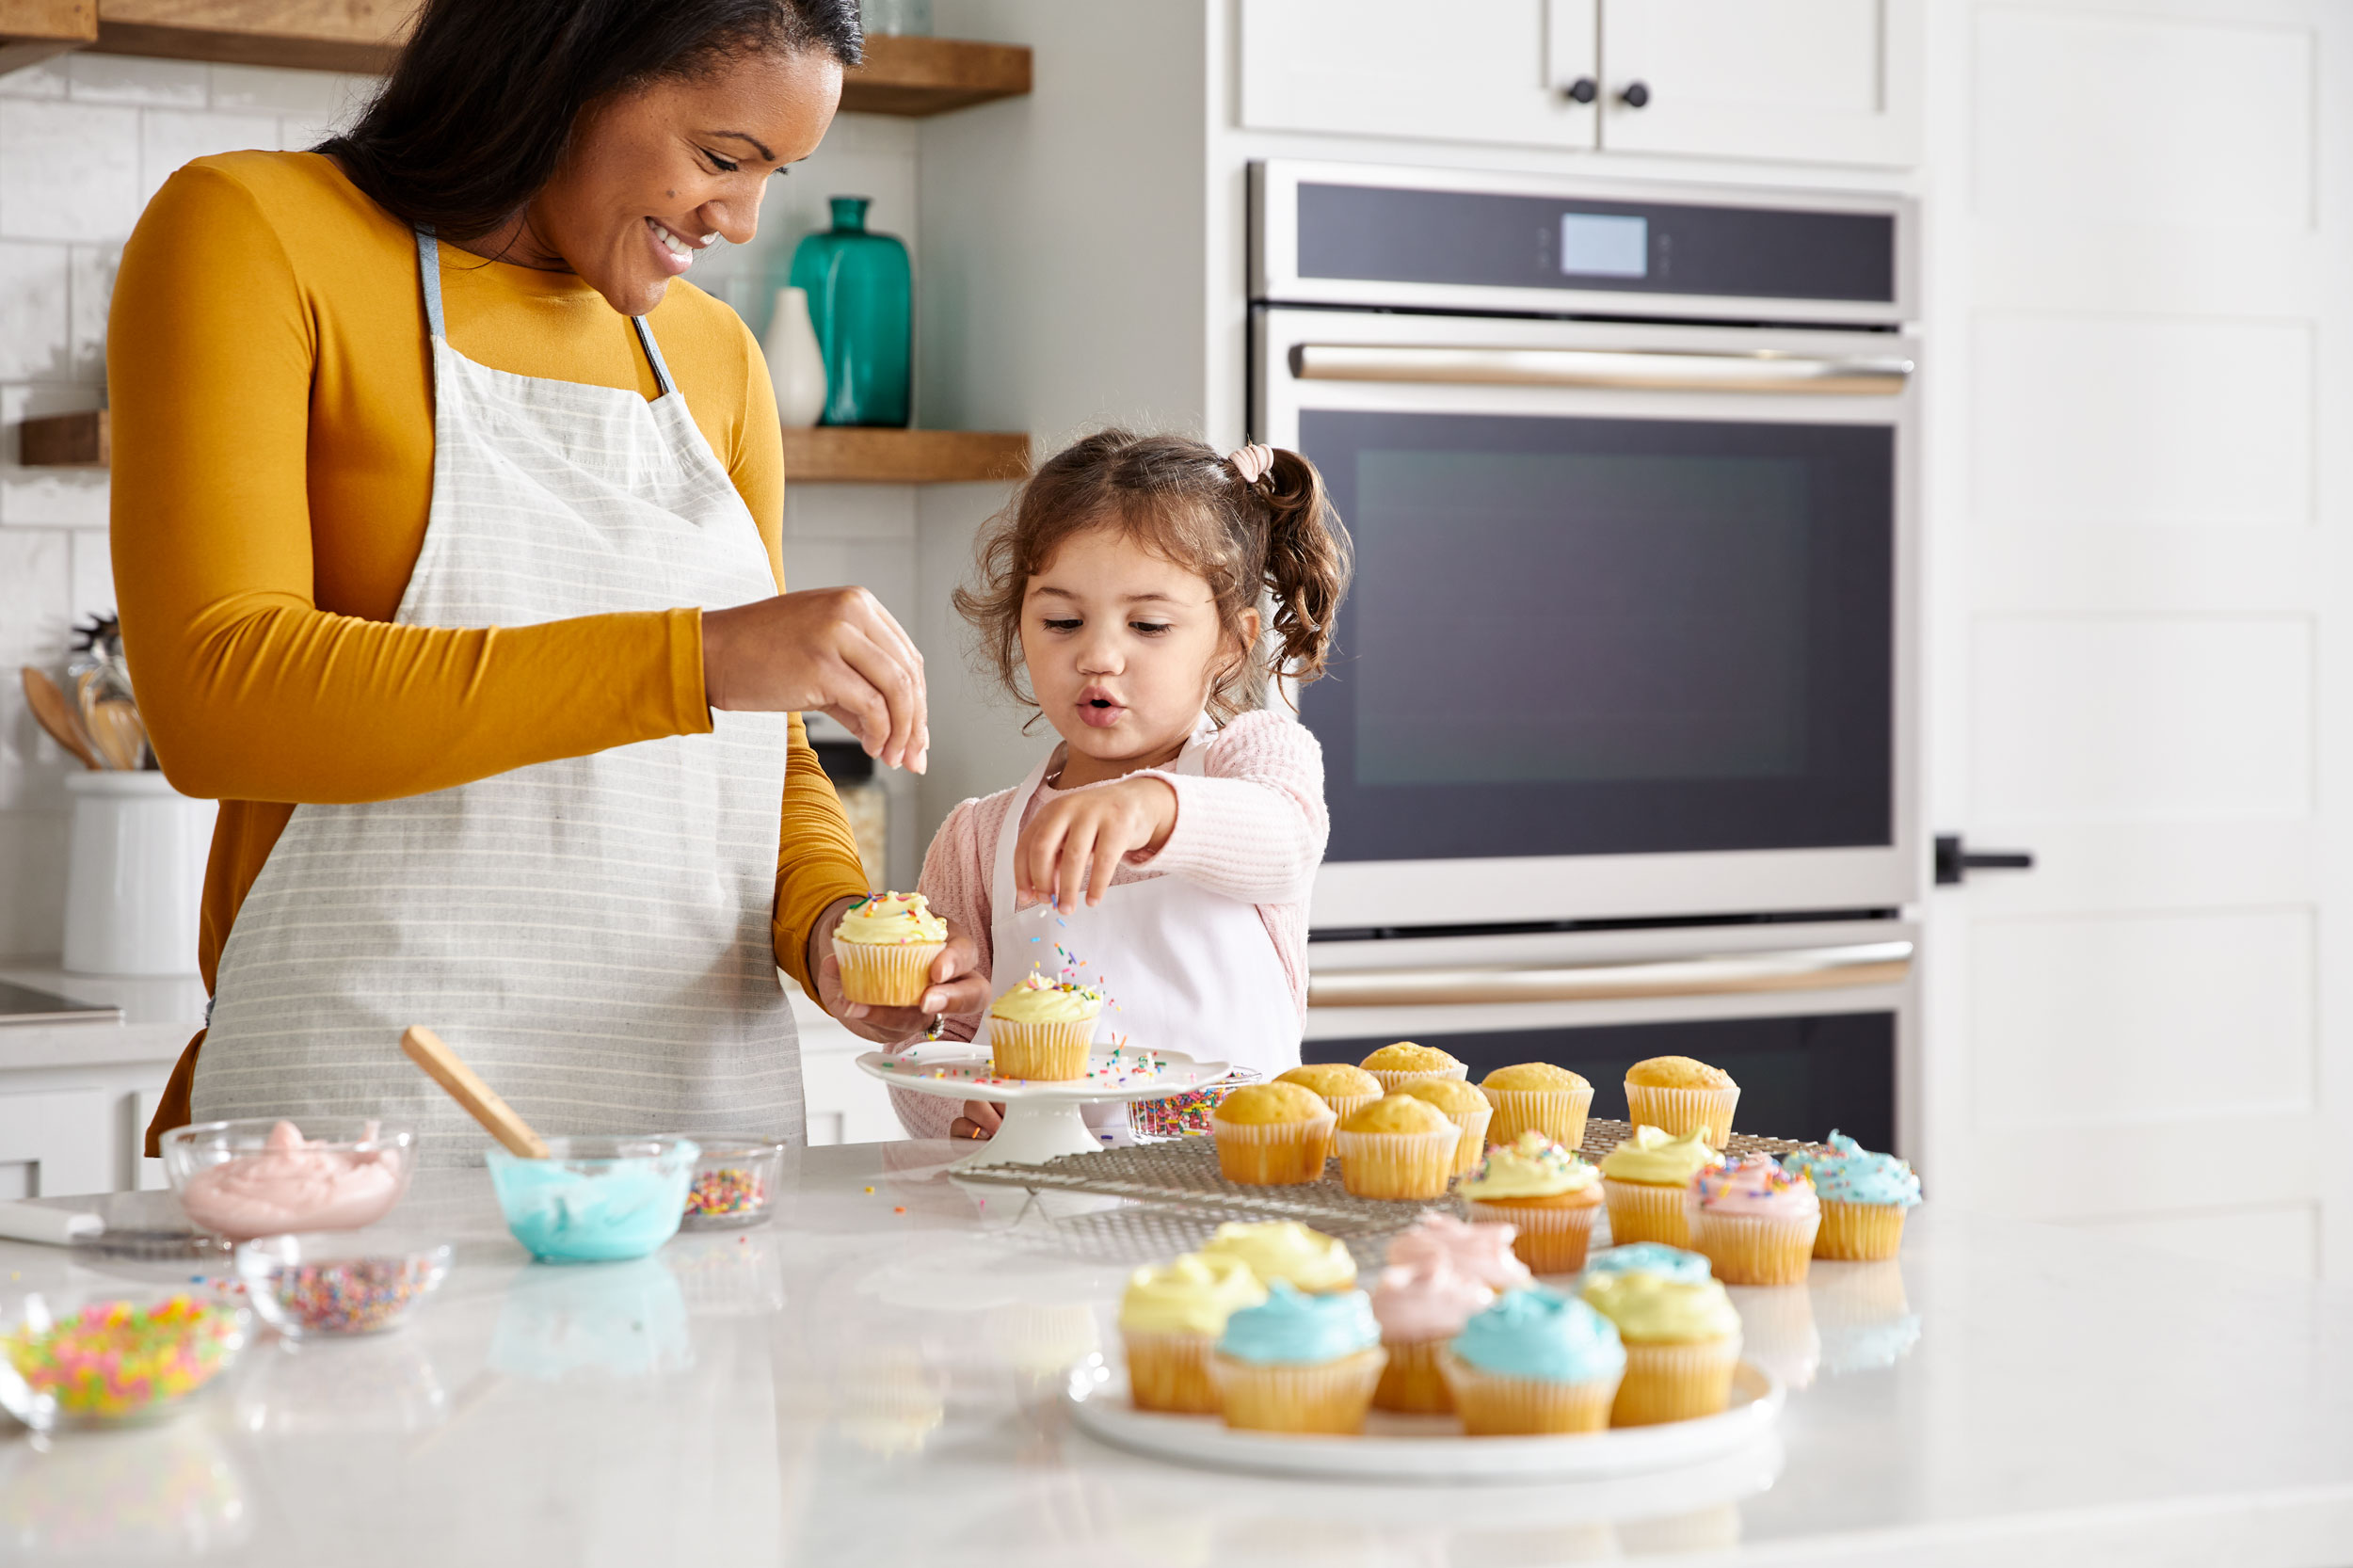 mother-and-daughter-sprinkling-cupcakes-dc-commercial-photography-eli-meir-kaplan